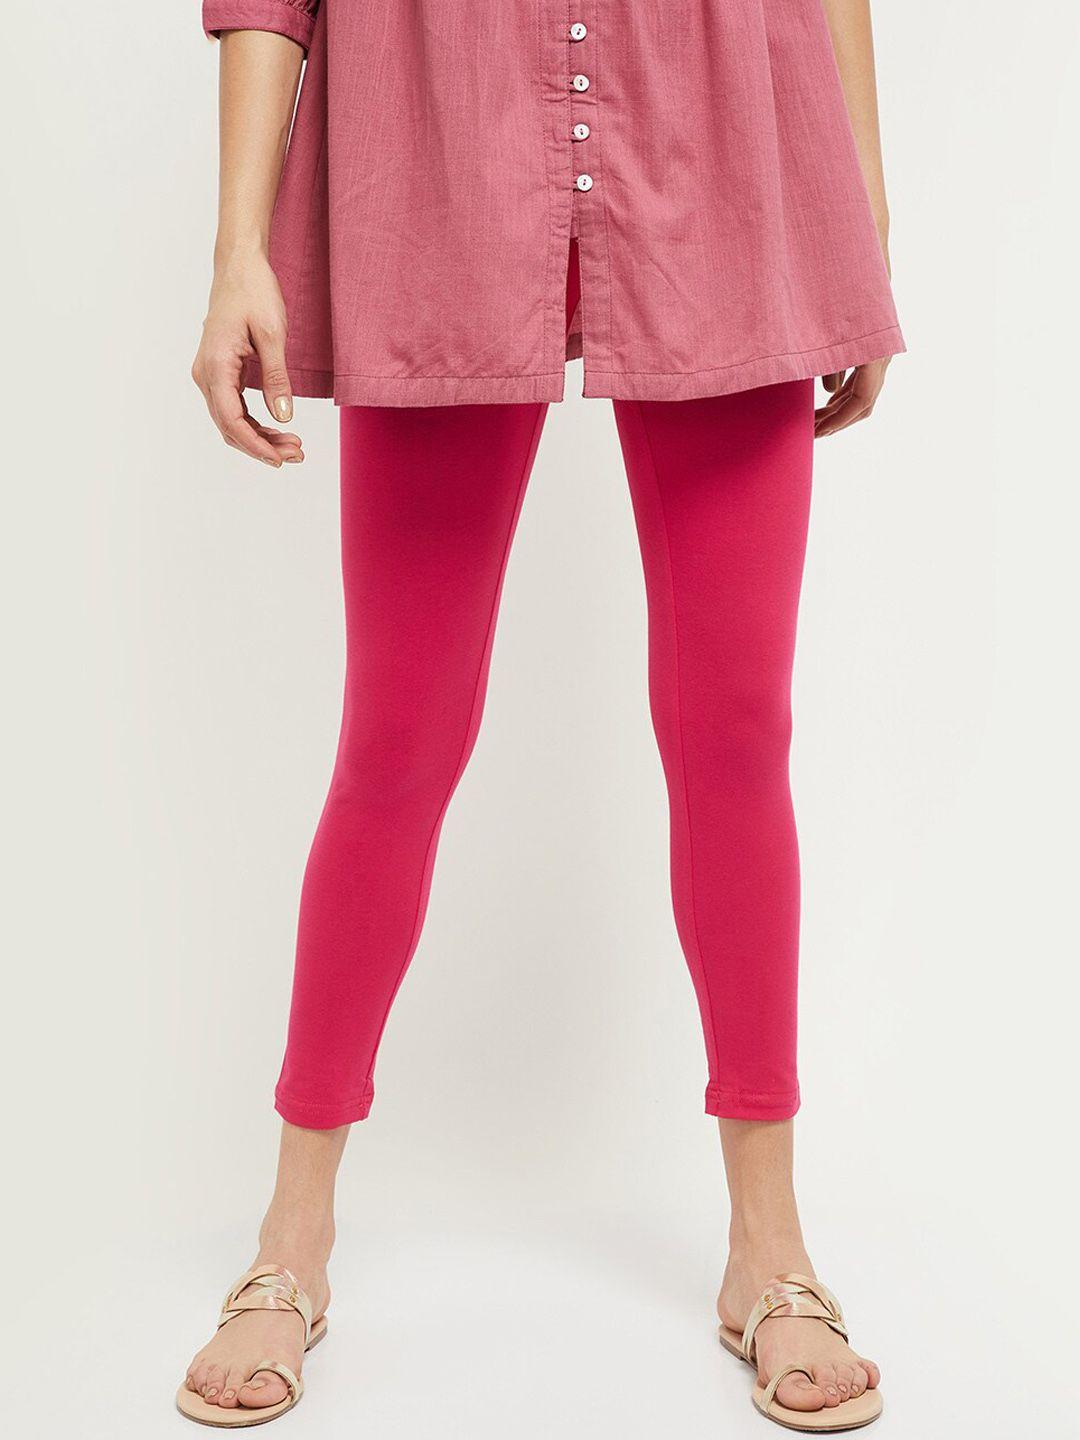 max women fuchsia-pink solid ankle-length leggings